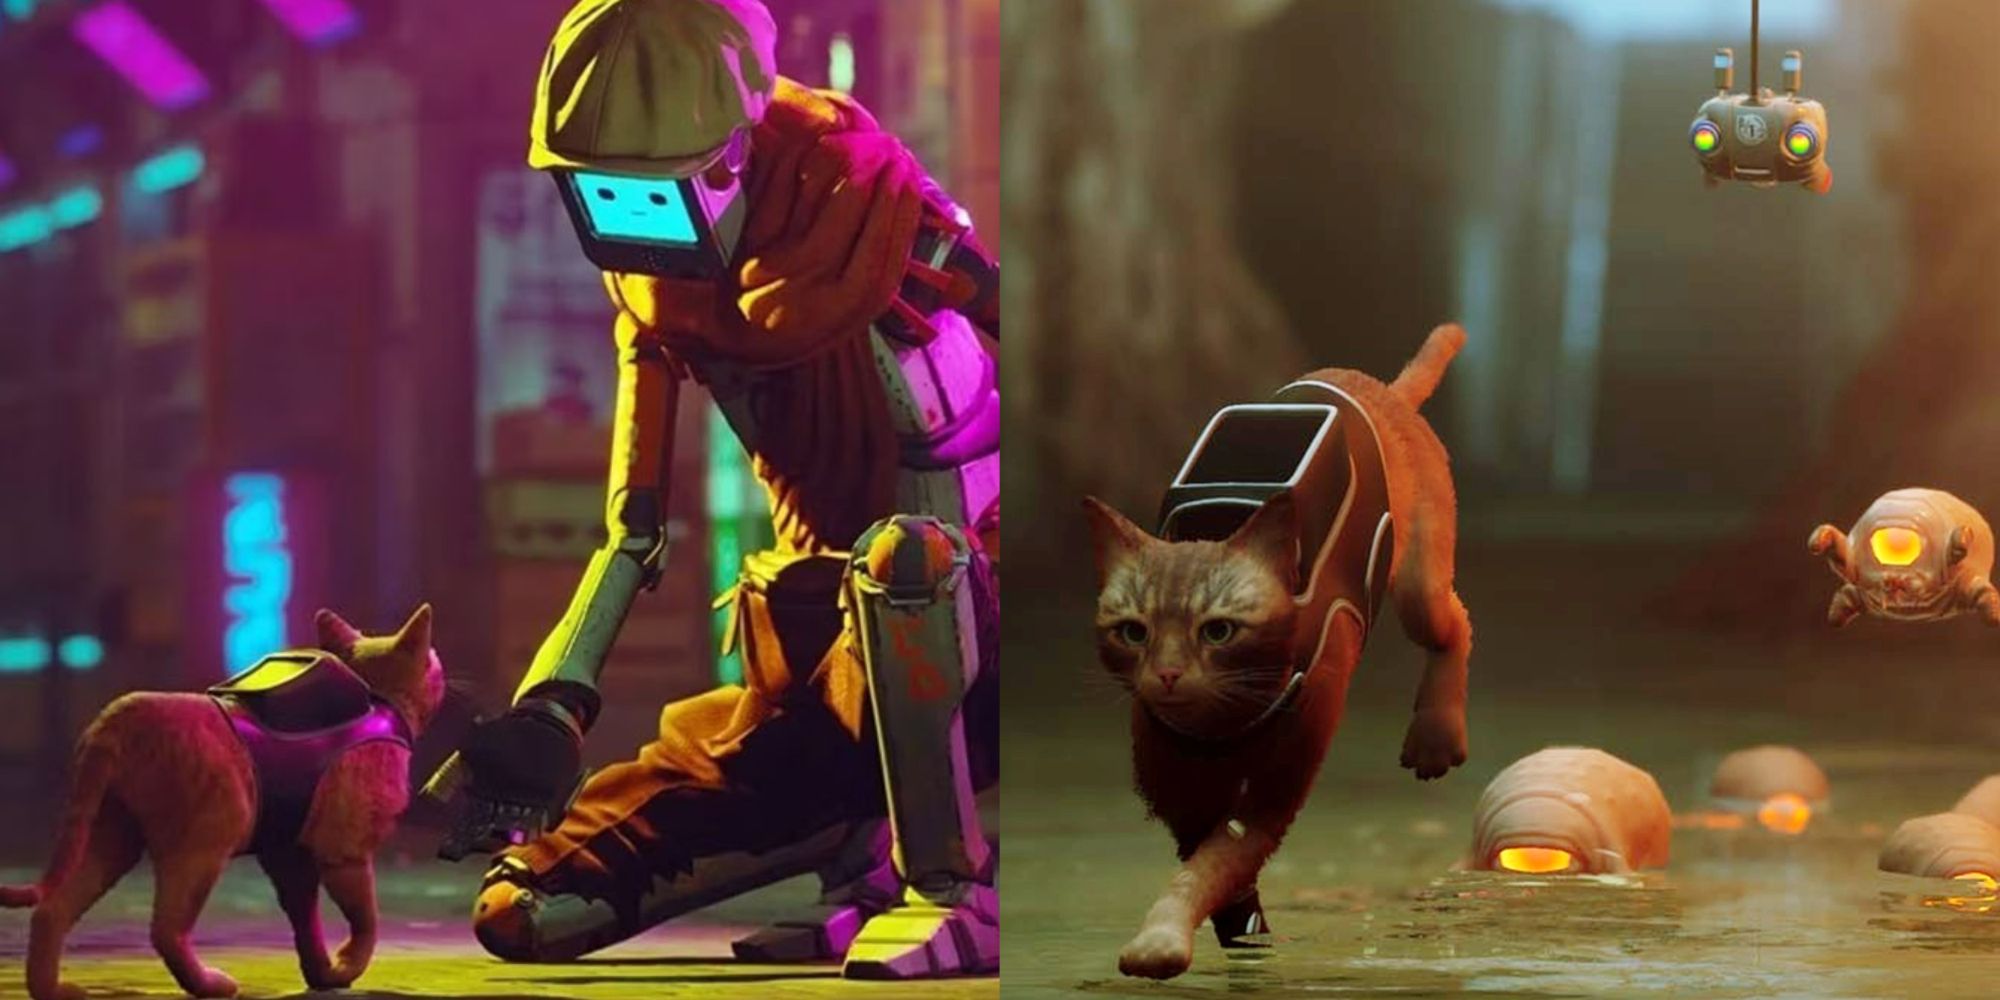 Stray is an upcoming PS5 game about a cat living among robots